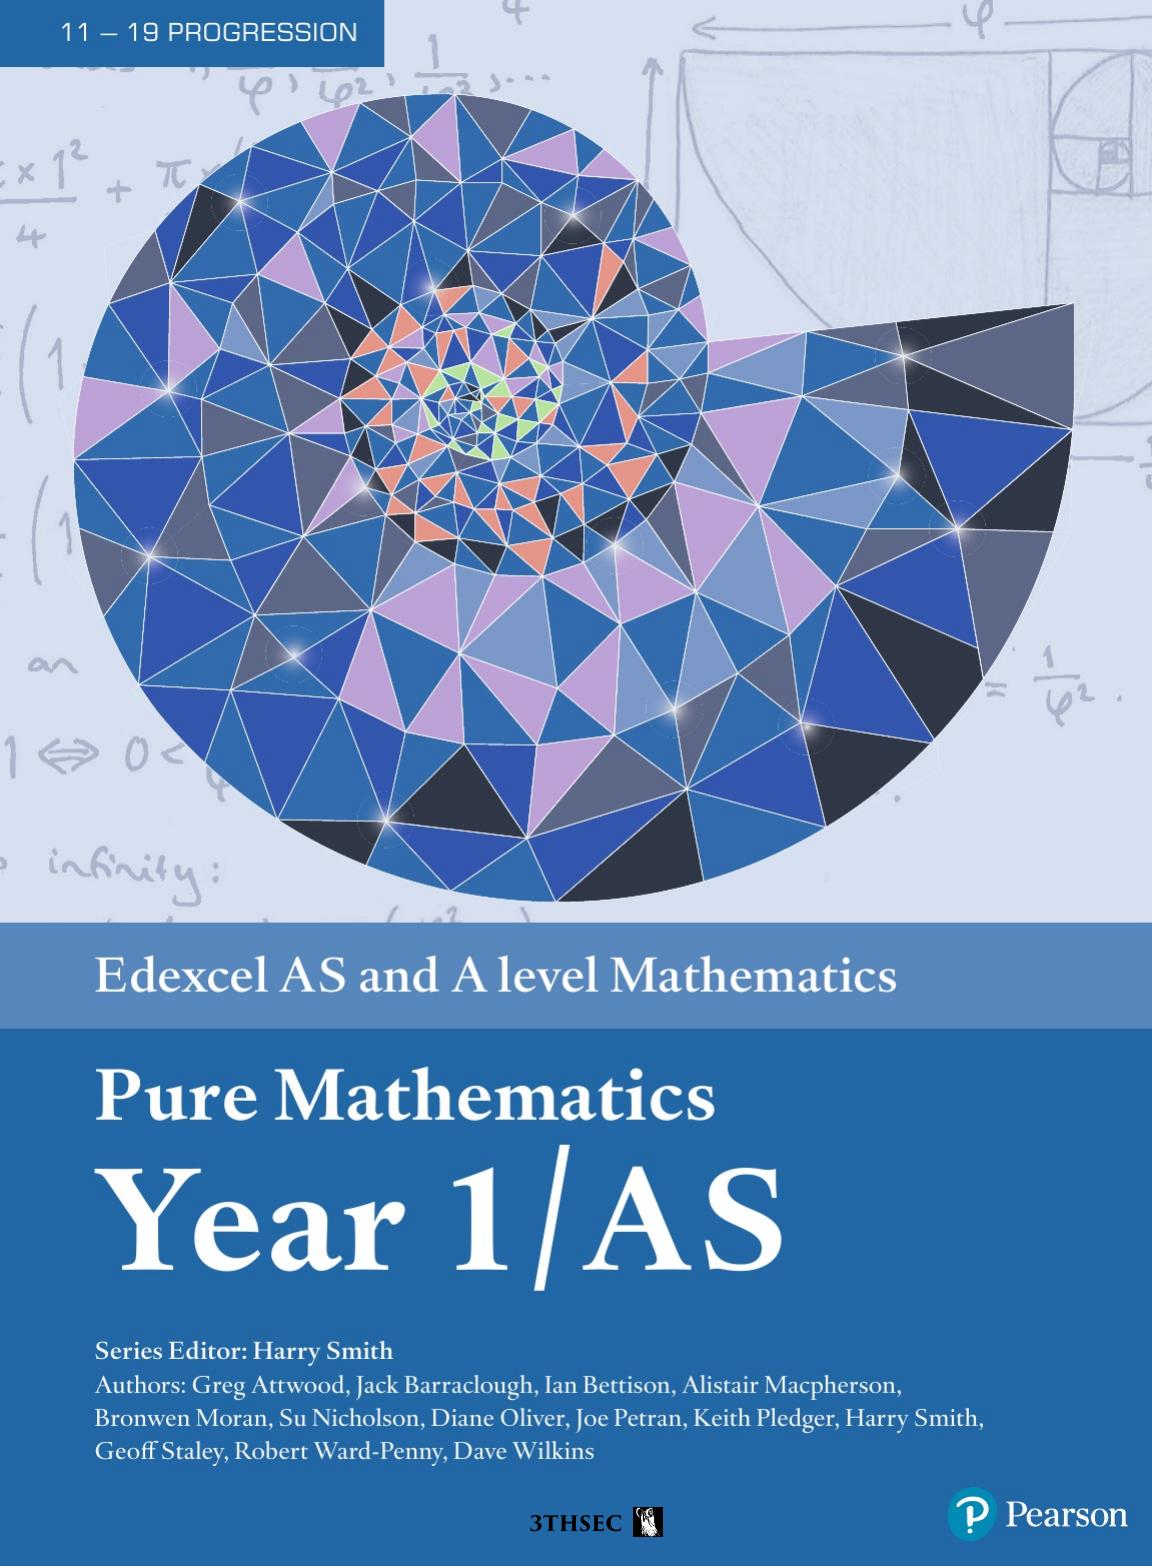 Edexcel AS and A level Mathematics Pure Mathematics Year 1AS Textbook + e-book by Various Authors